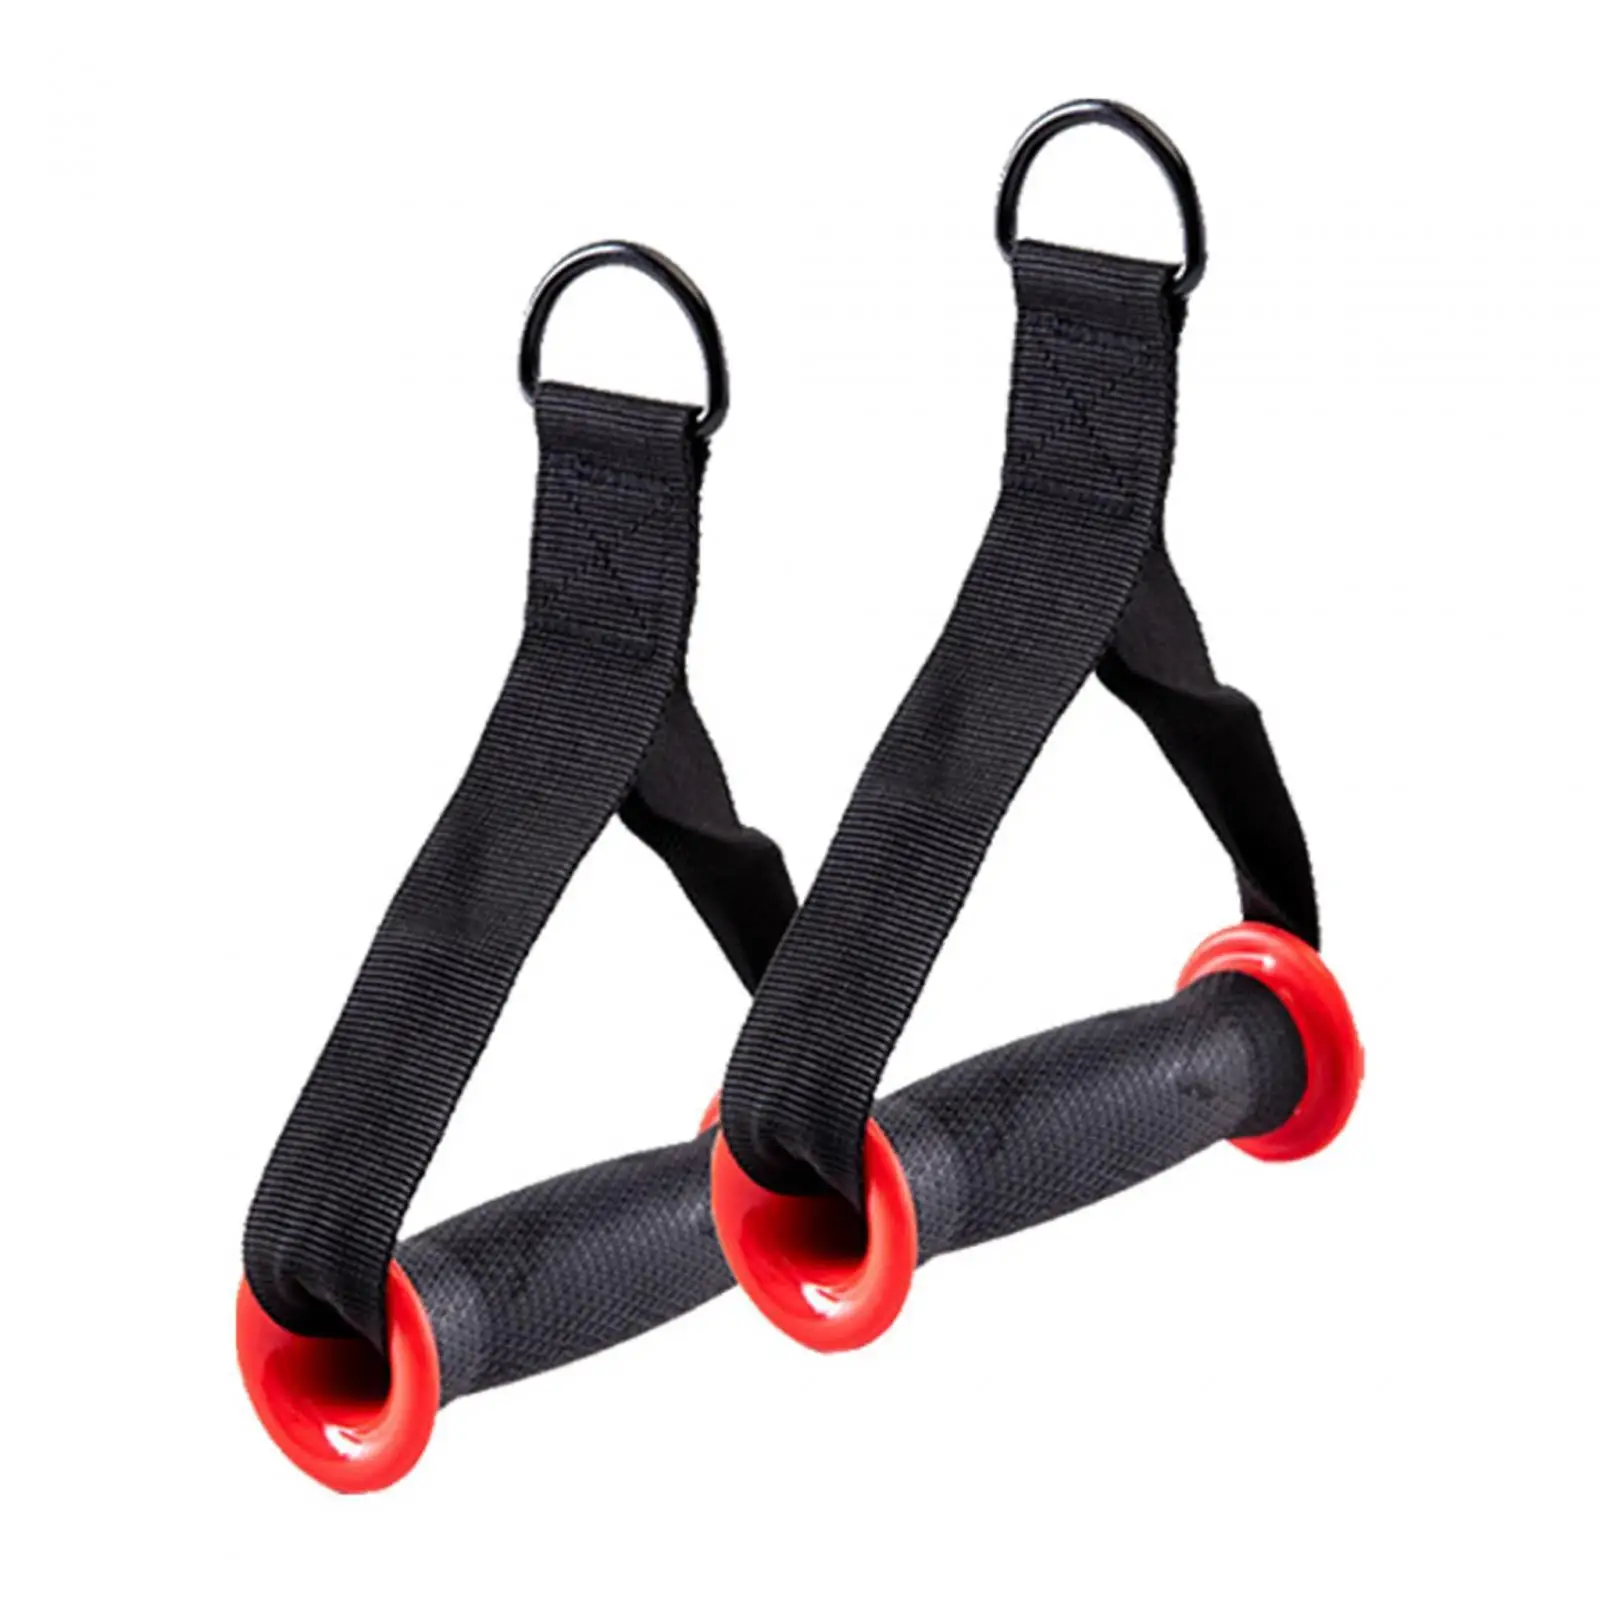 2x Cable Machine Attachment Handles Gym Accessory Universal Pull up Handles